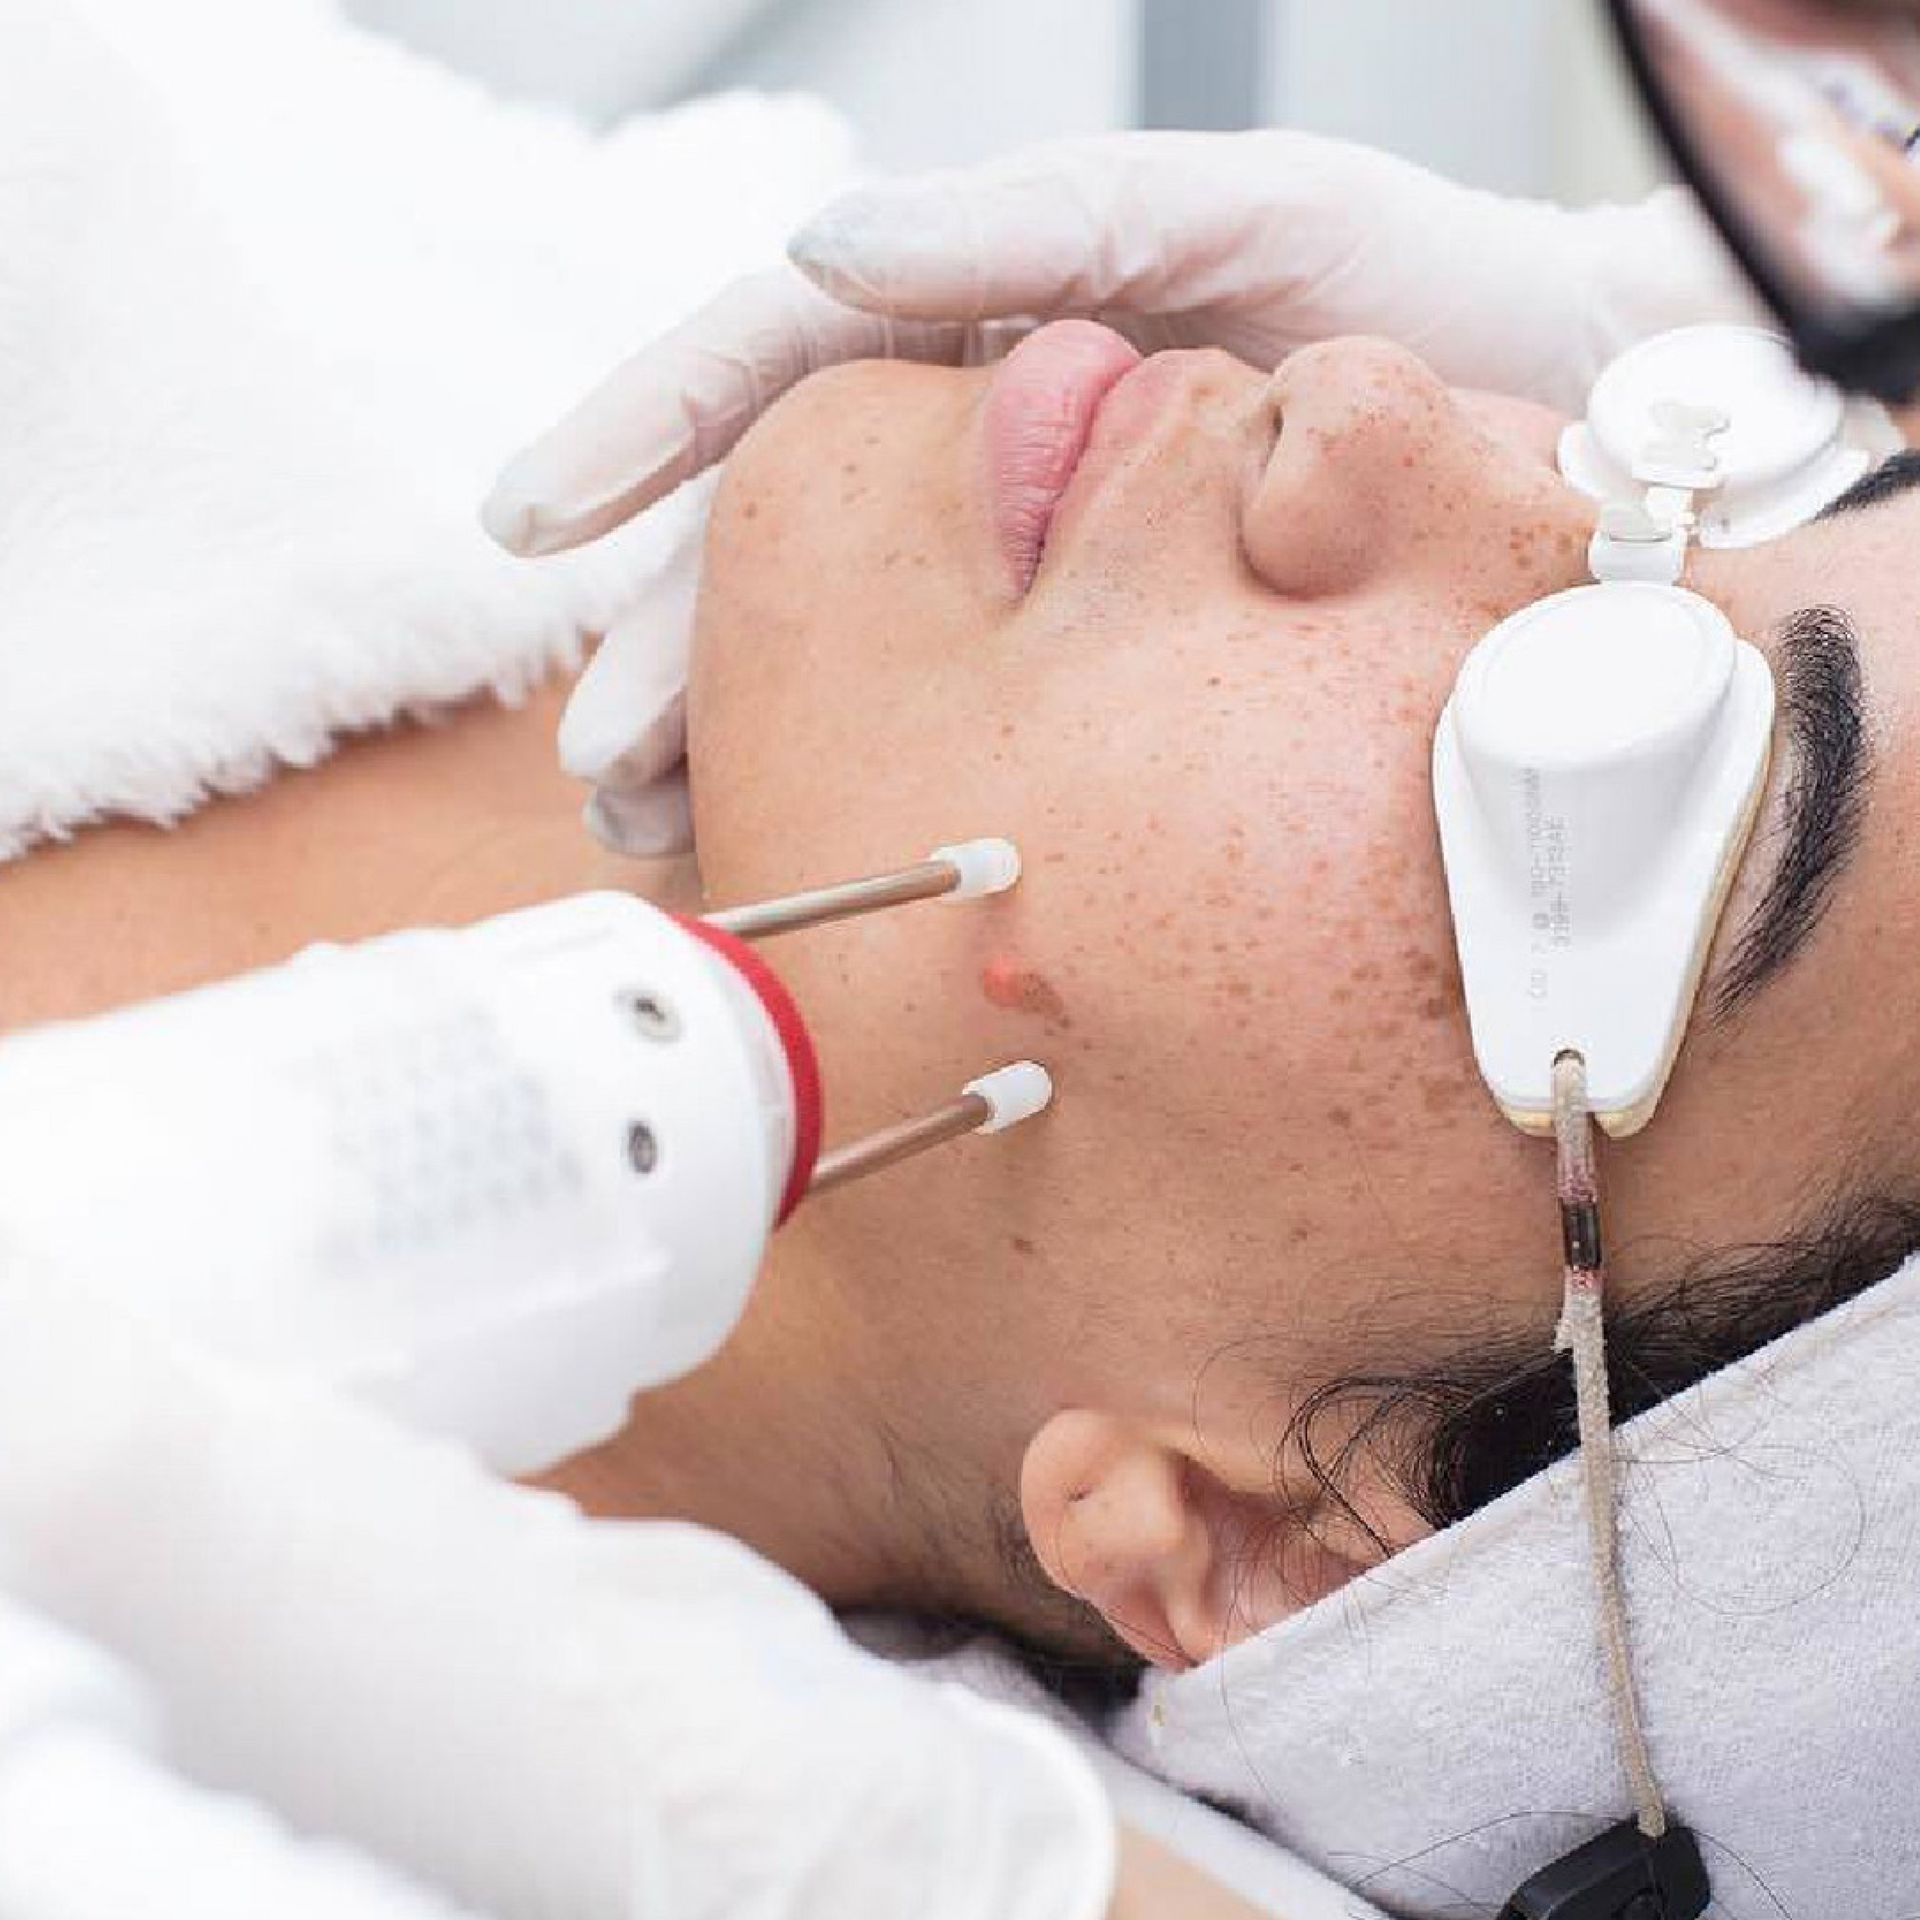 Featuring the Aerolase Laser performing a skin treatment at a medical spa